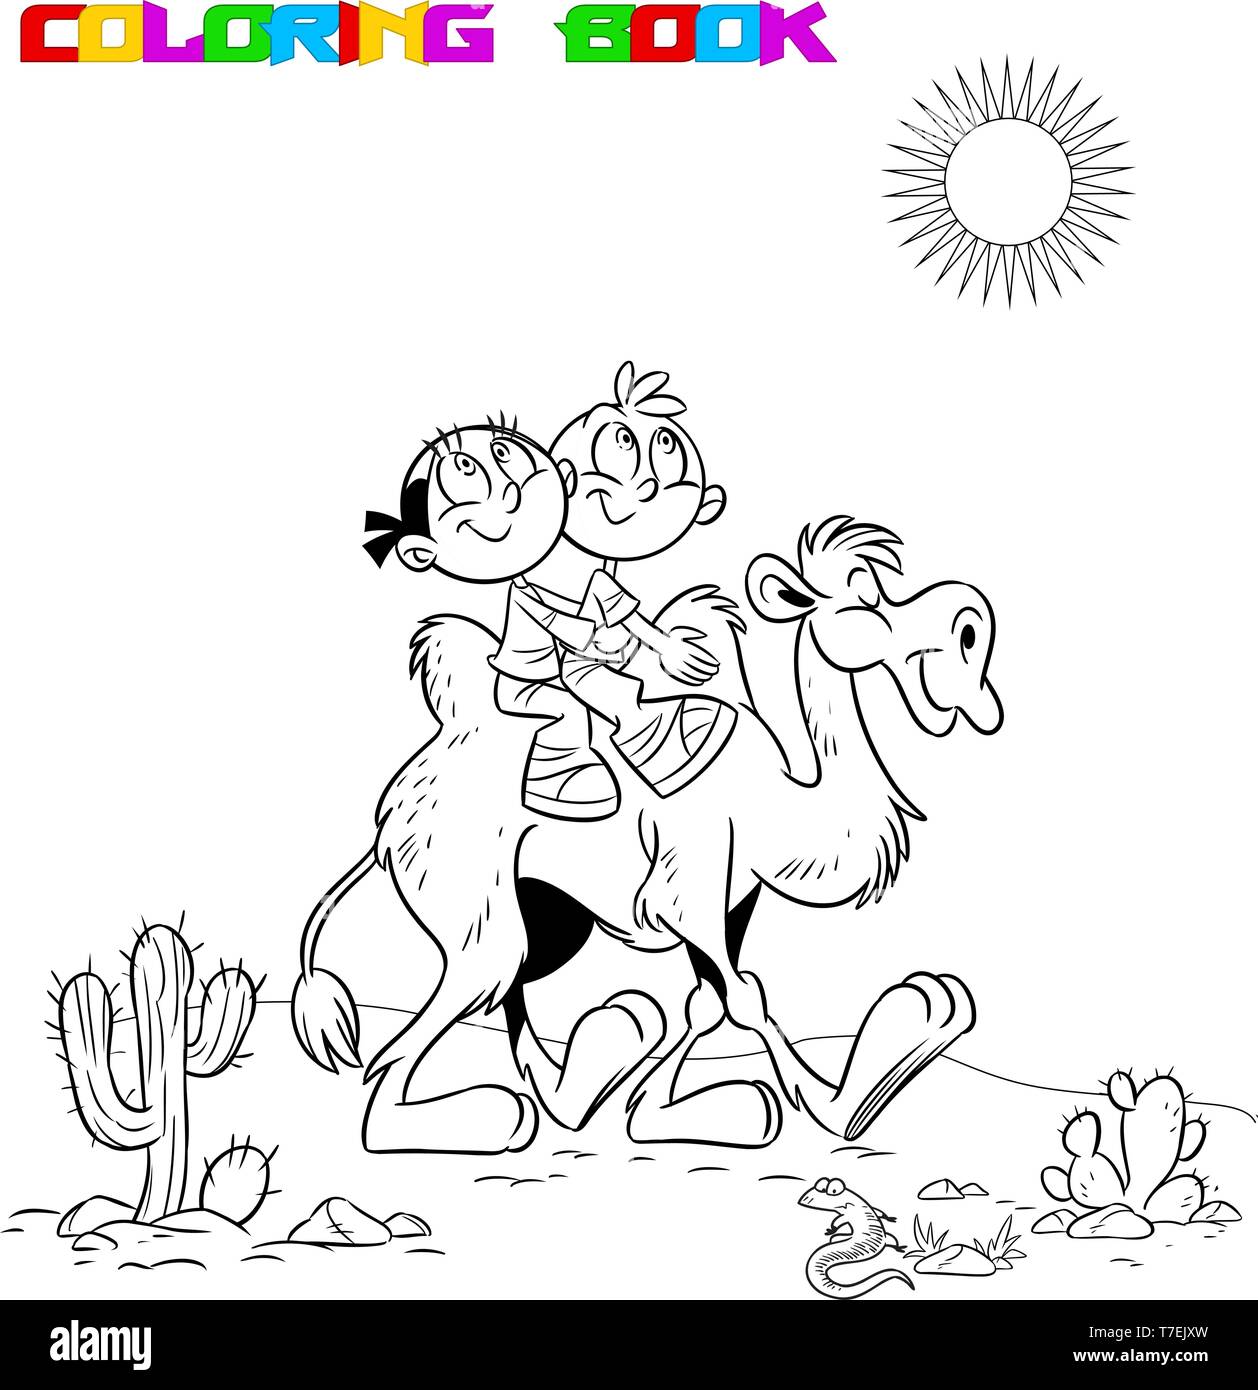 The illustration shows children, who ride on a camel. They travel through the desert. Is made a black outline for a coloring book. Stock Vector